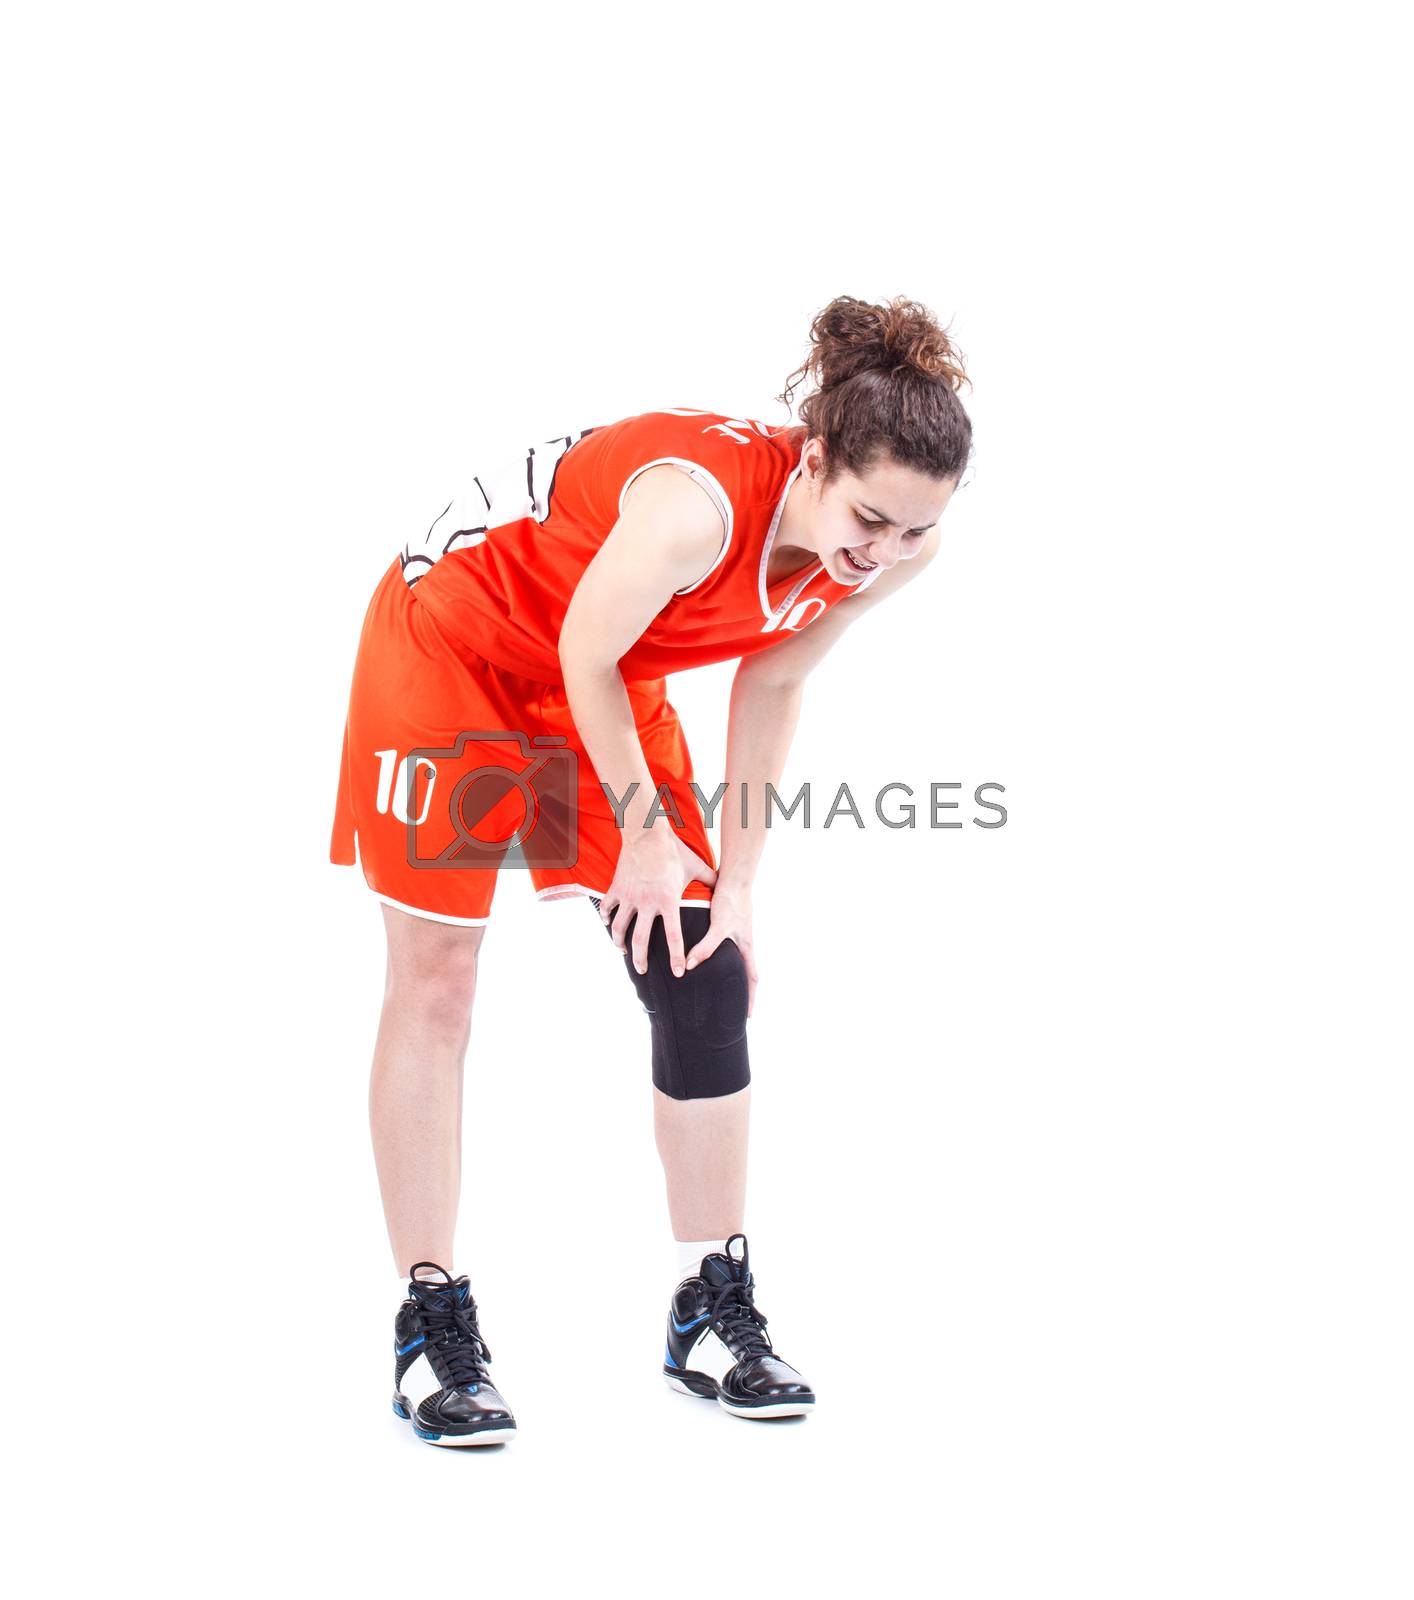 Royalty free image of Basketball player by grafvision